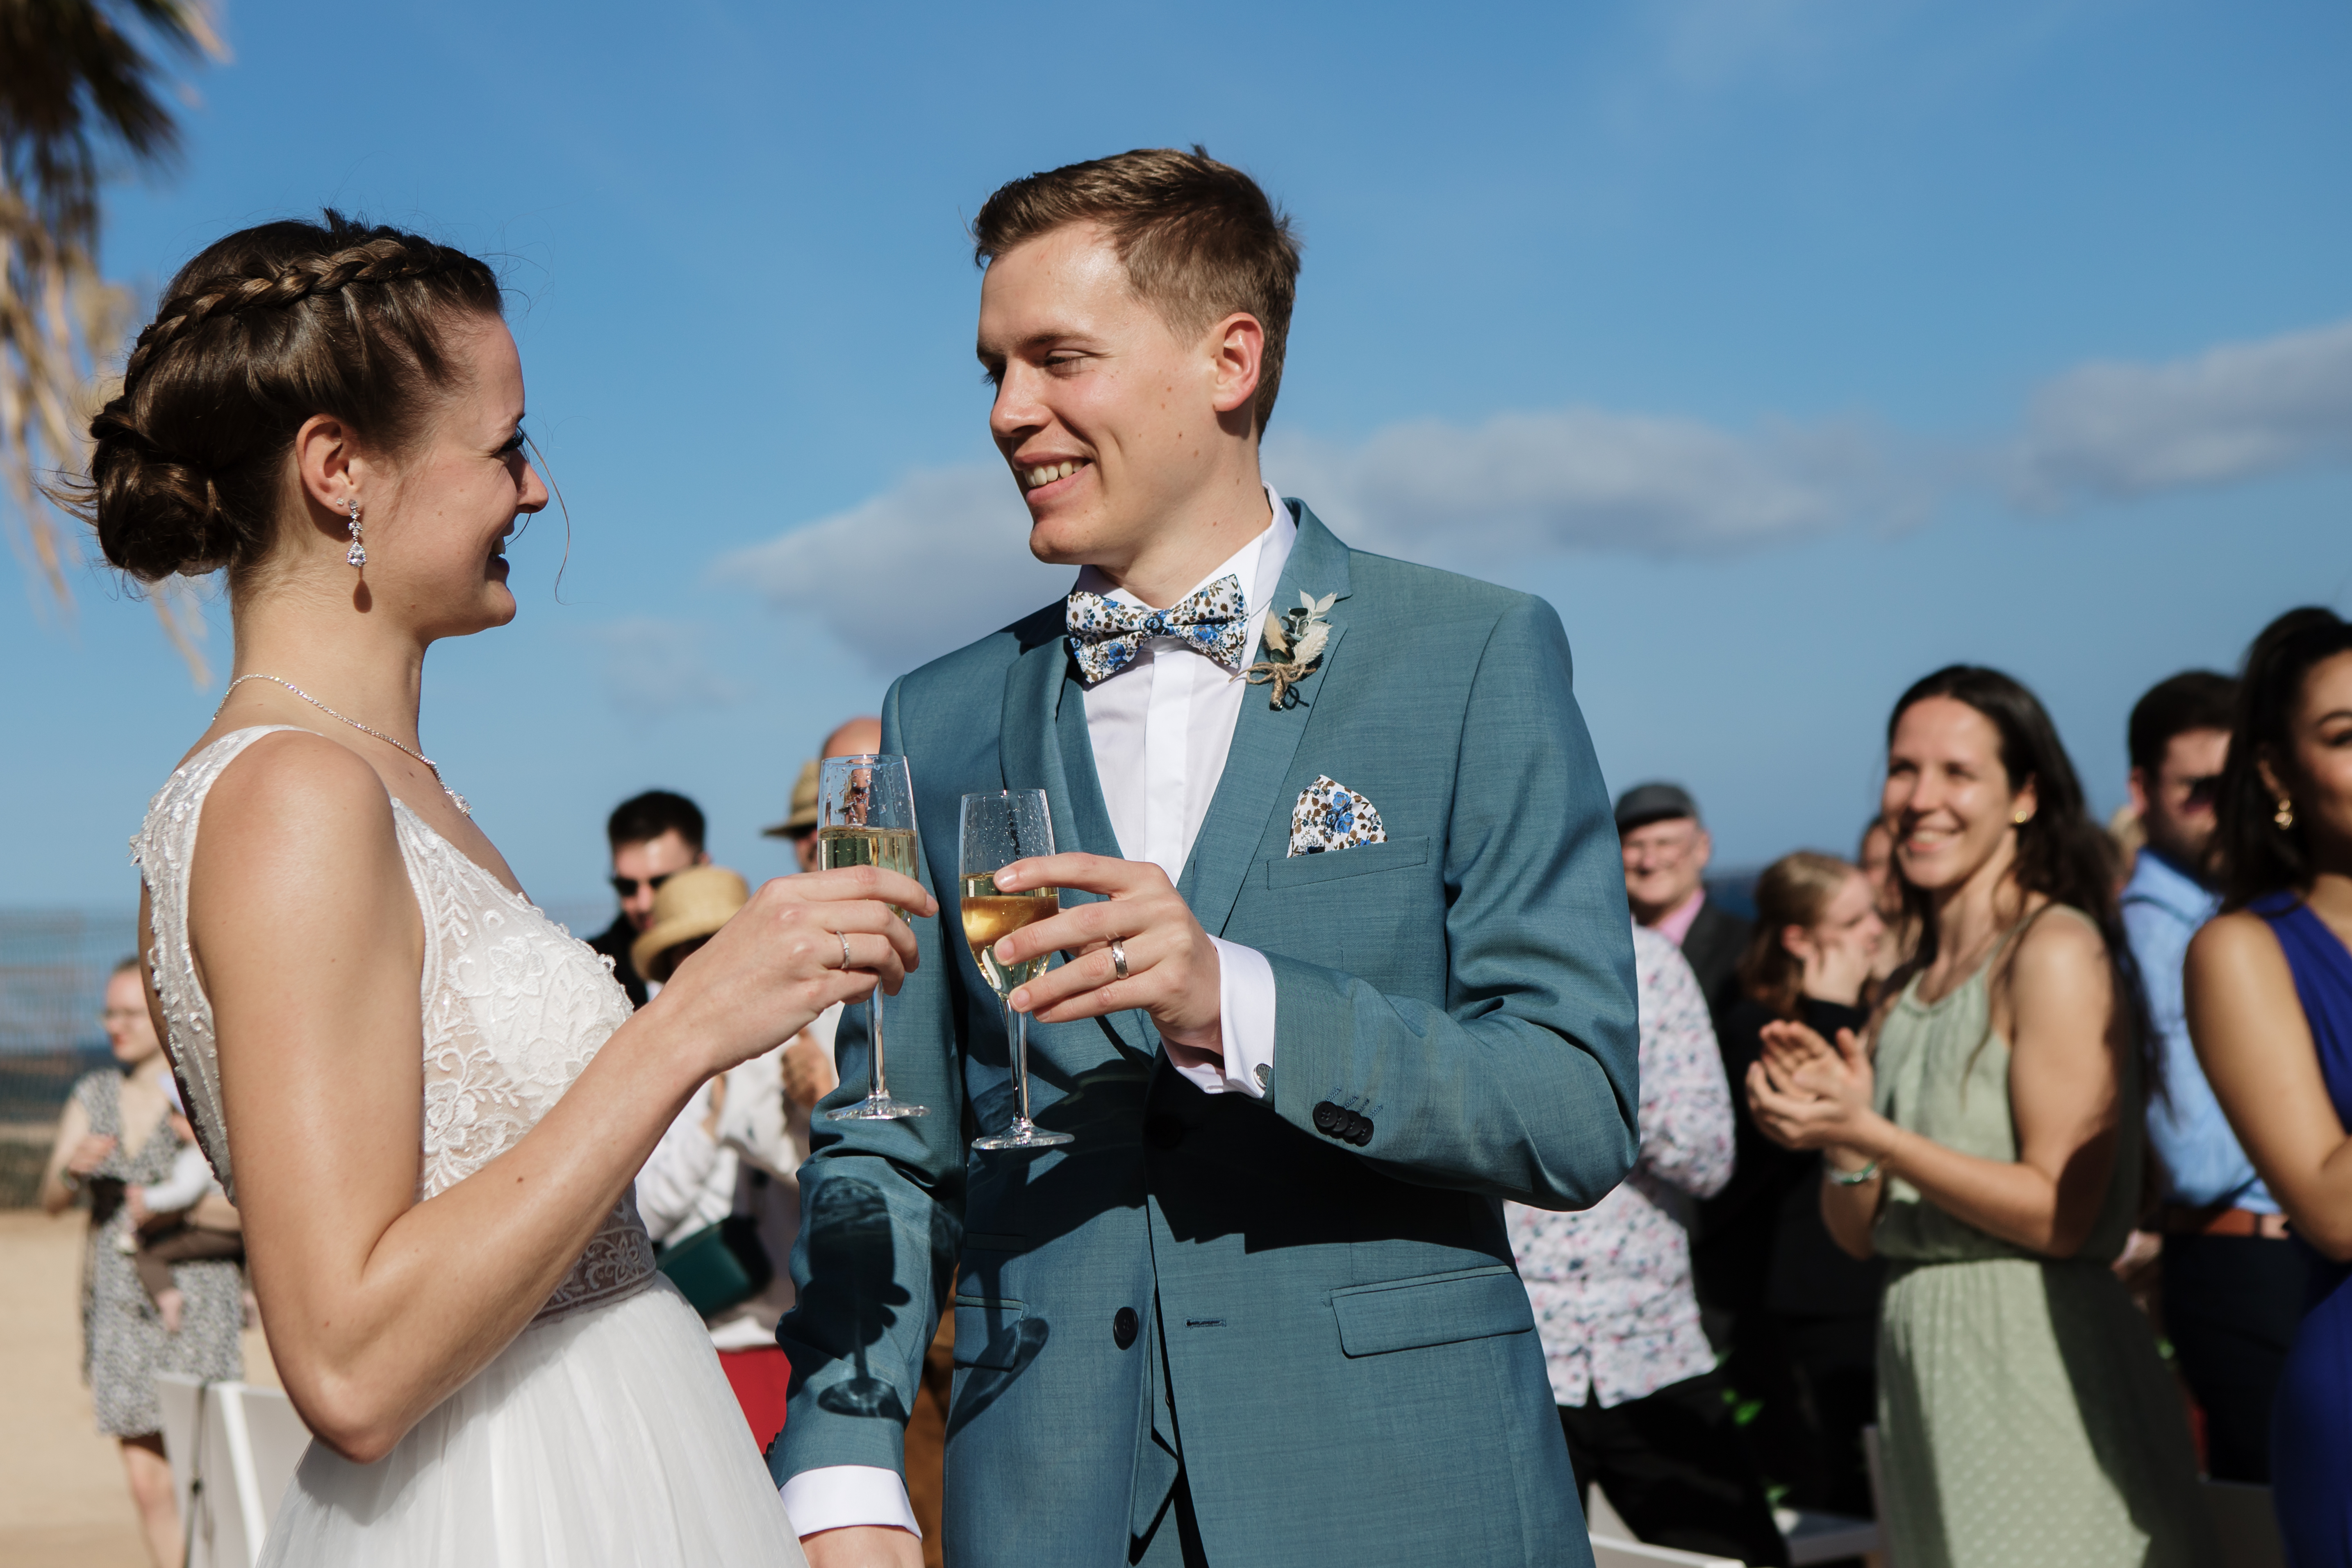 Experience the magic of your Fuerteventura wedding with professional photography. Bride and groom toast with champagne at Fuerteventura Princess Hotel in Morro Jable, surrounded by stunning scenery. Our expert wedding photographer captures every moment for cherished memories.